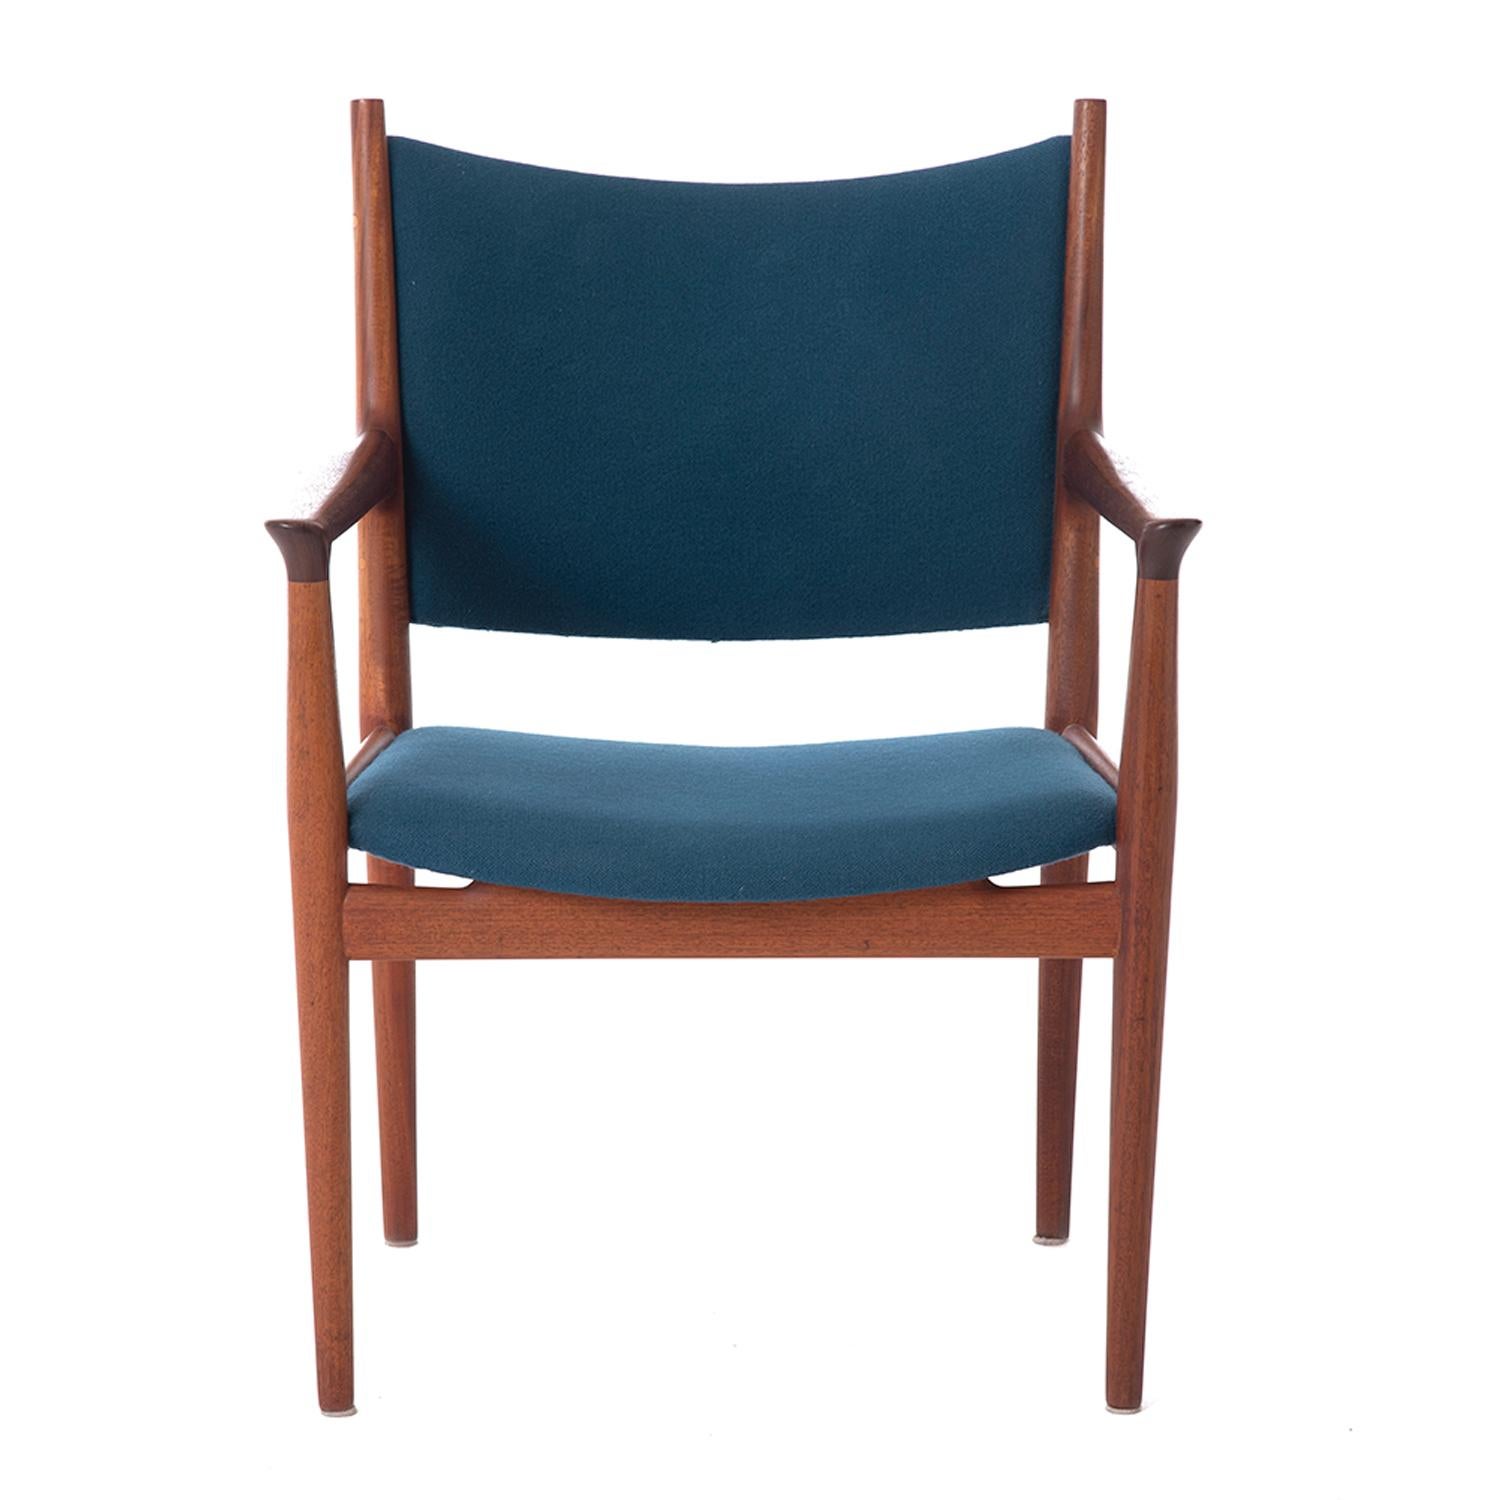 Danish modern teak occasional armchair designed by Hans J. Wegner and produced by Johannes Hansen. Teak frame with blue wool upholstery.

Professional, skilled furniture restoration is an integral part of what we do every day. Our goal is to